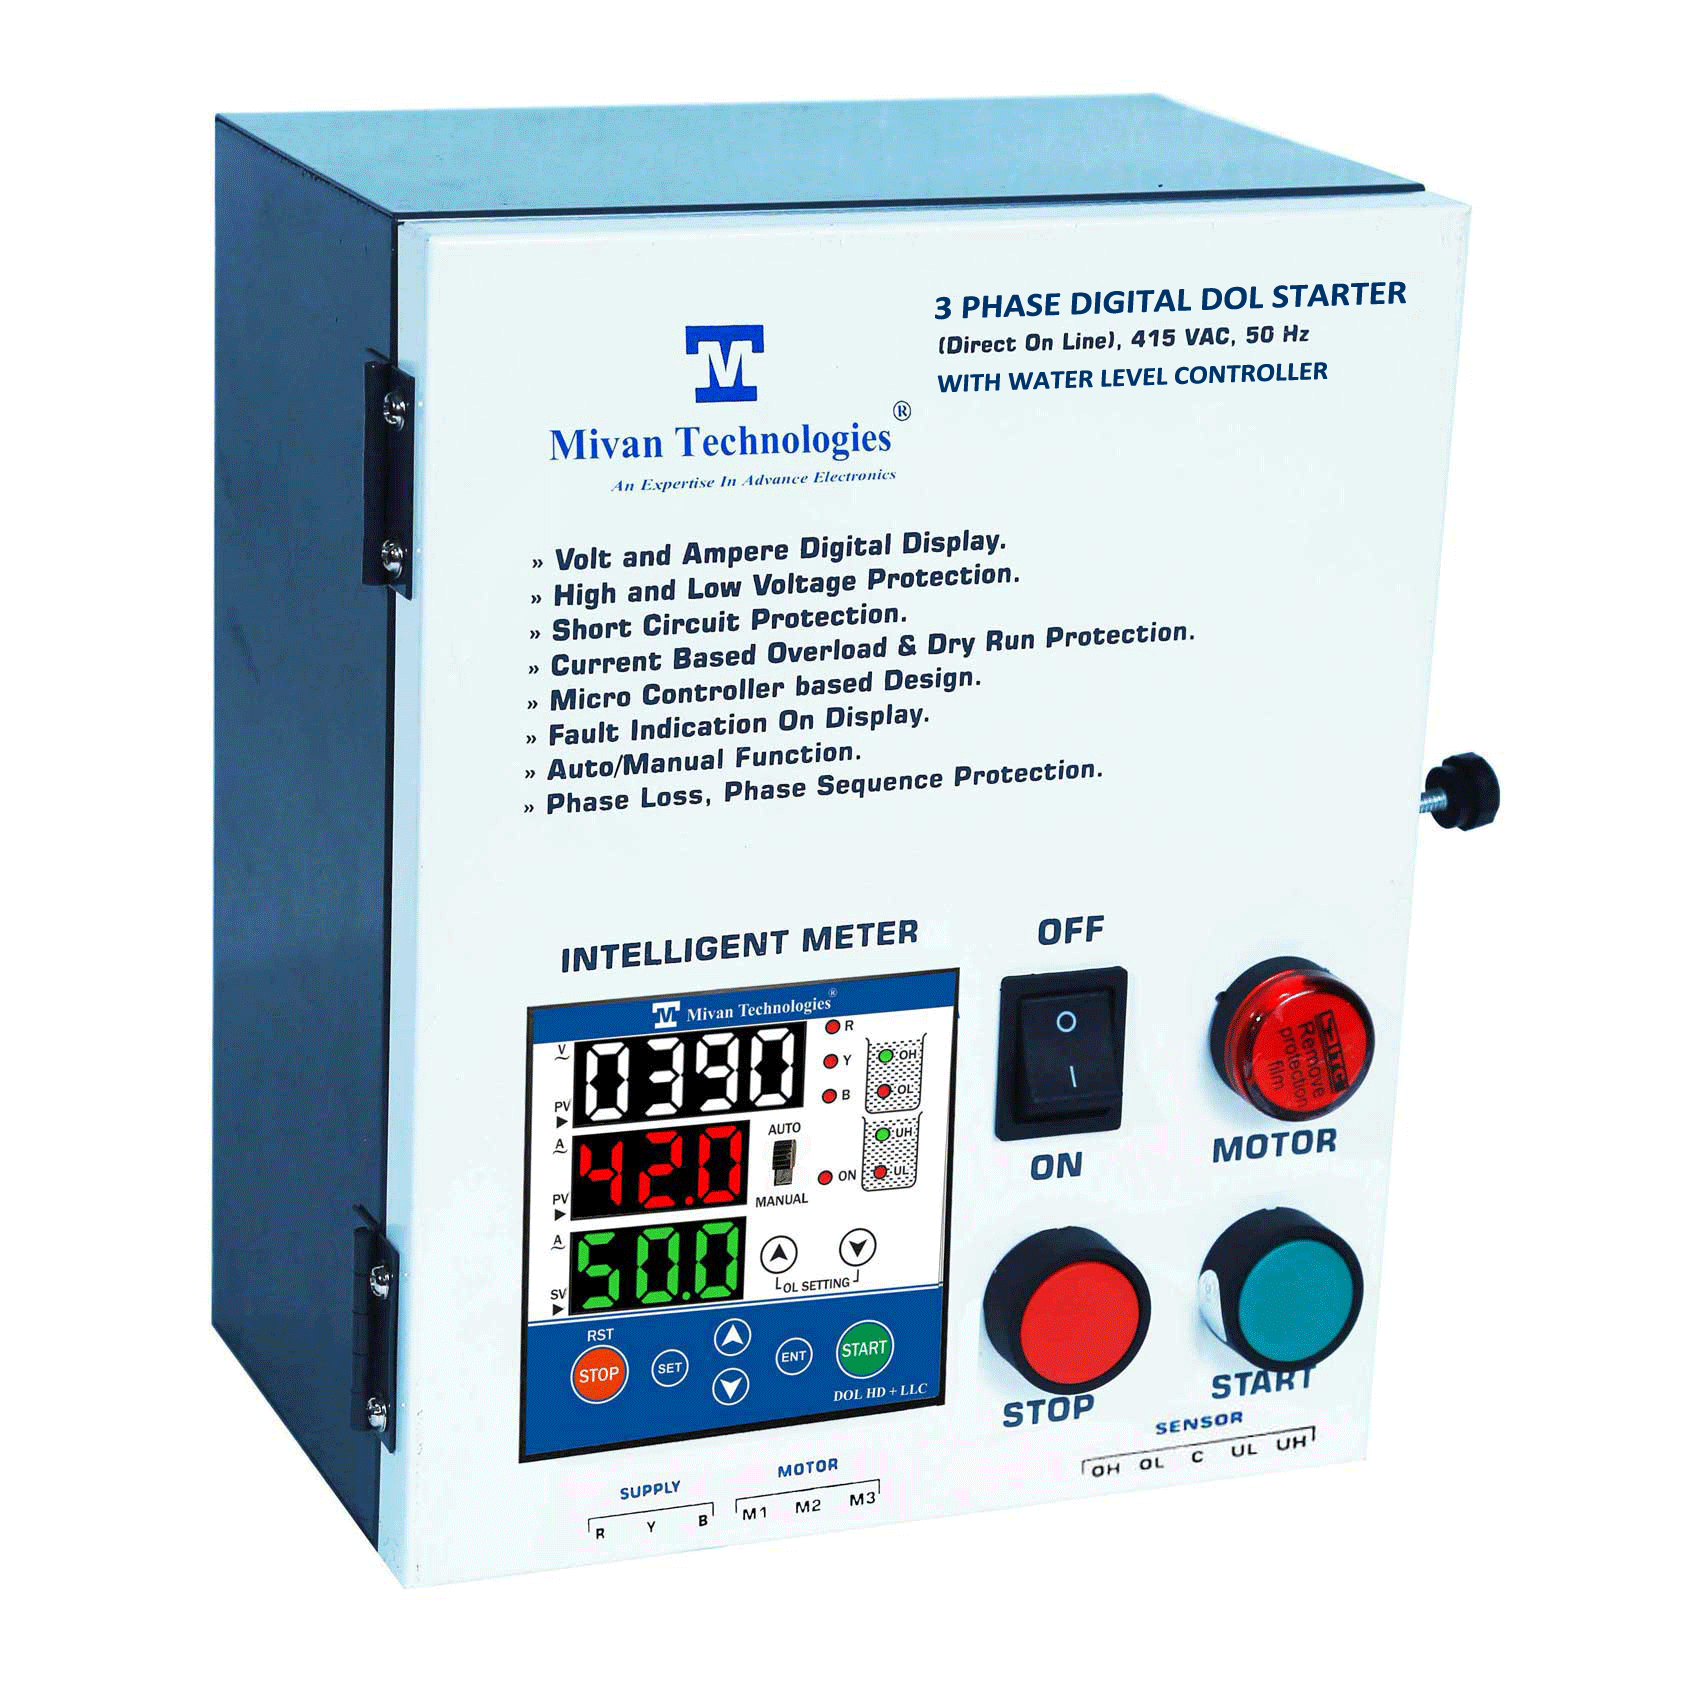 3 phase 3 display Heavy Duty Water level controller with DOL motor starter with HV LV OL Dry protection with Auto switch spp and timer suitable up to 30 hp DOL HD 3D LLC 65 A